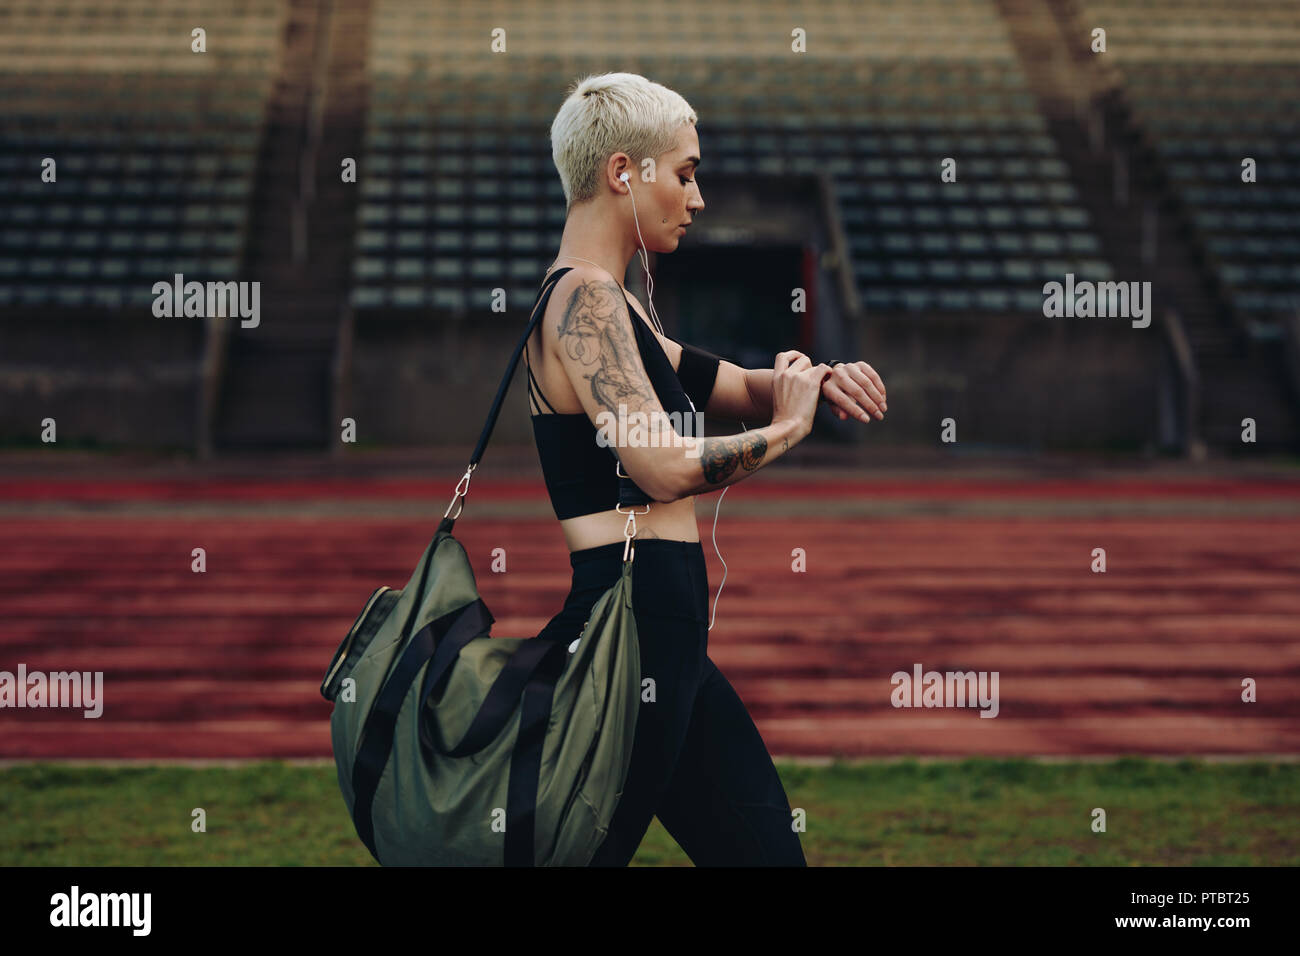 Female athlete walking beside an athletic track looking at her wrist watch. Woman in fitness wear walking in a track and field ground carrying her bag Stock Photo